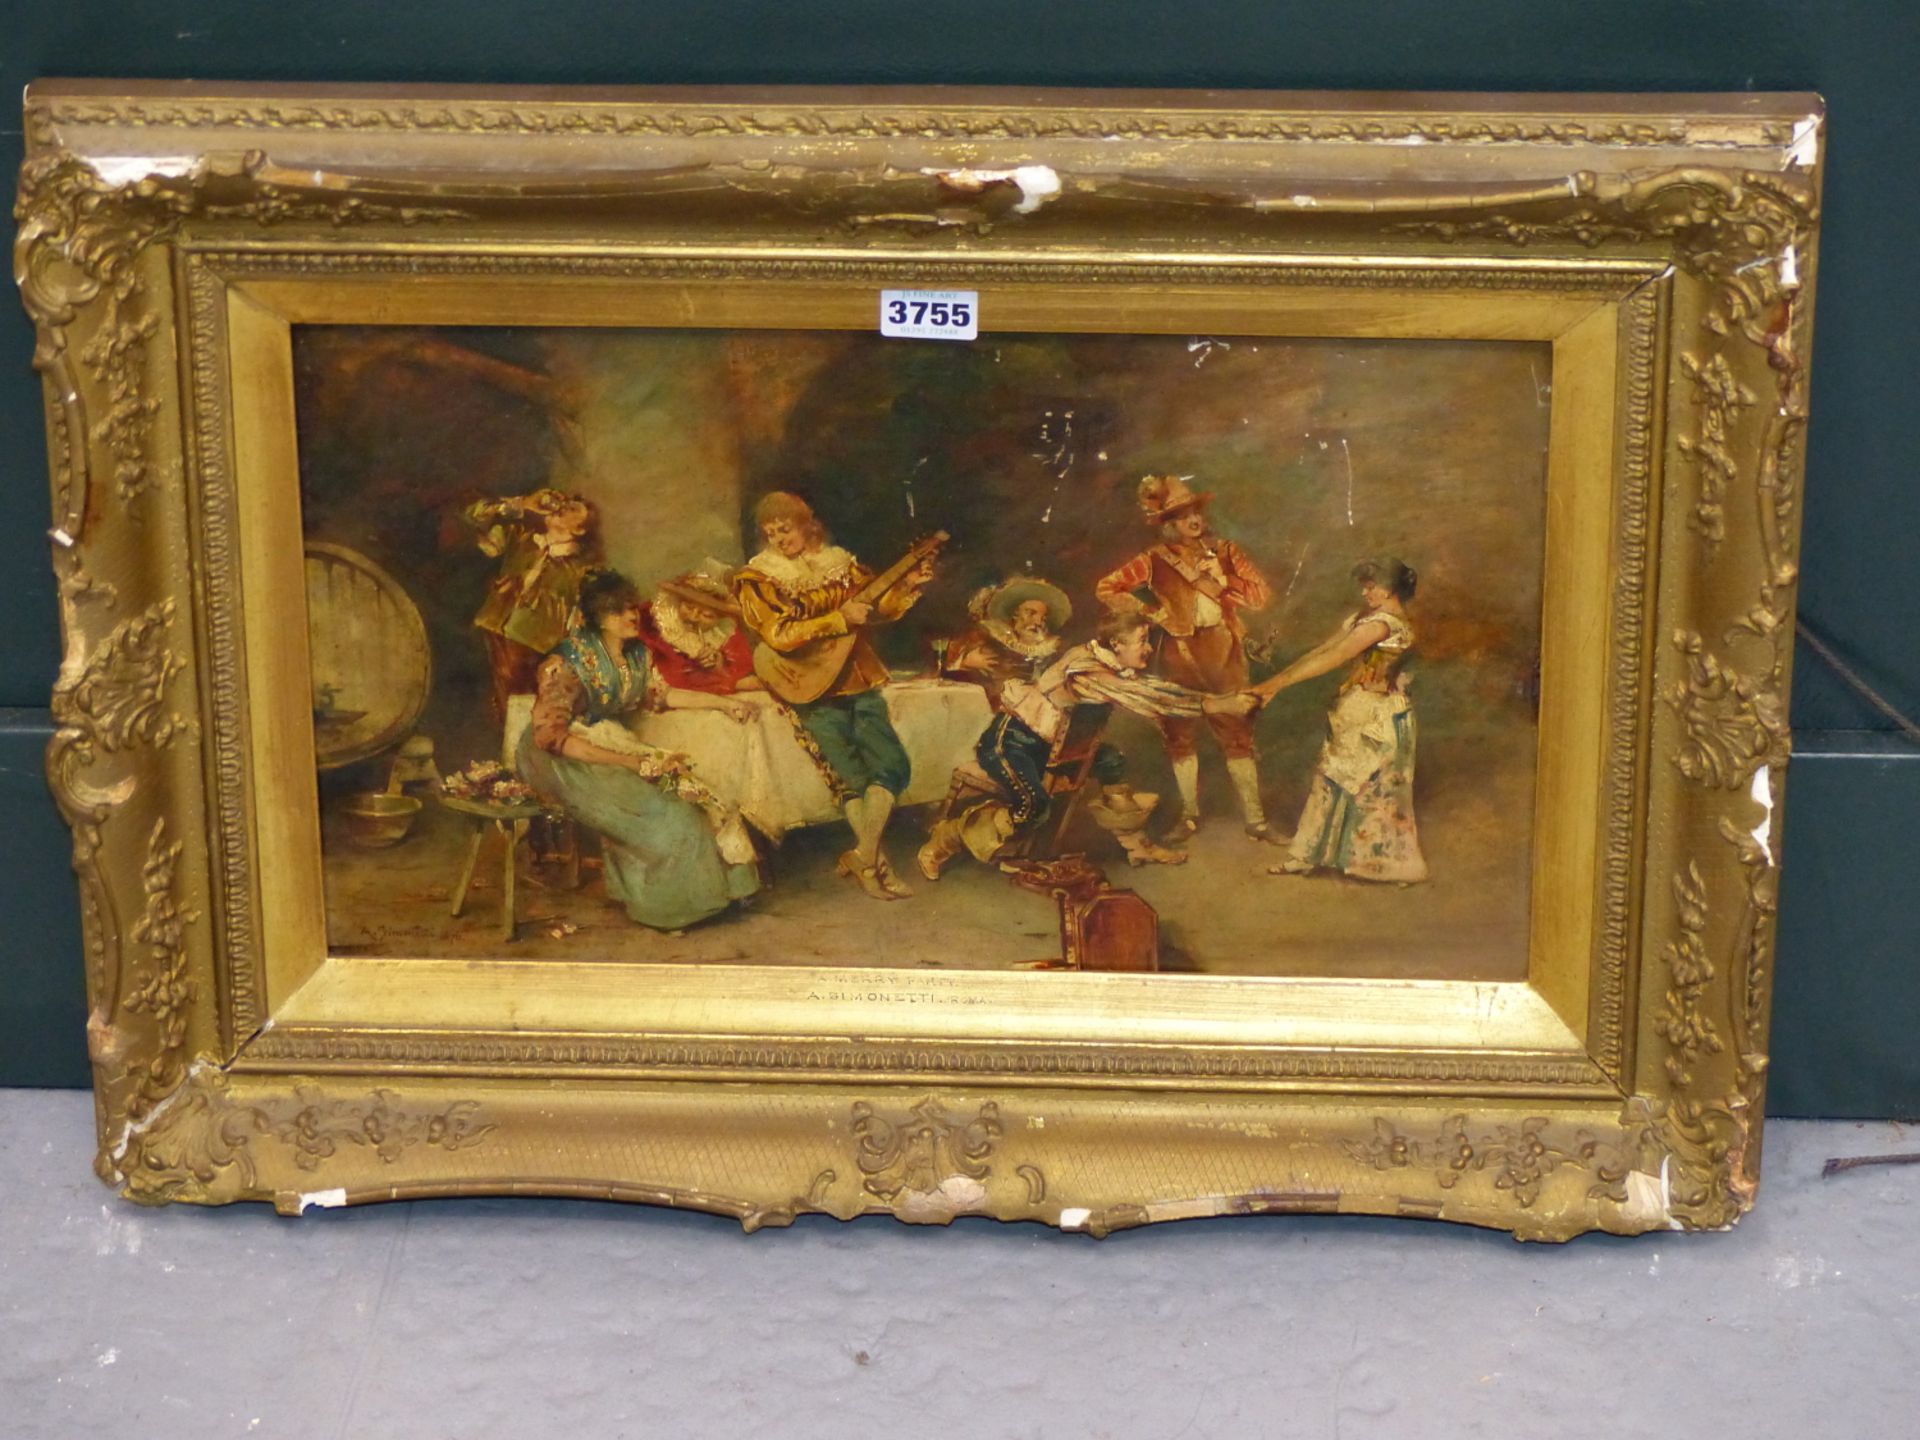 A SIMONETTI (19TH CENTURY) A MERRY PARTY, OIL ON PANEL, SIGNED LOWER LEFT AND DATED 1876, THE - Image 3 of 9